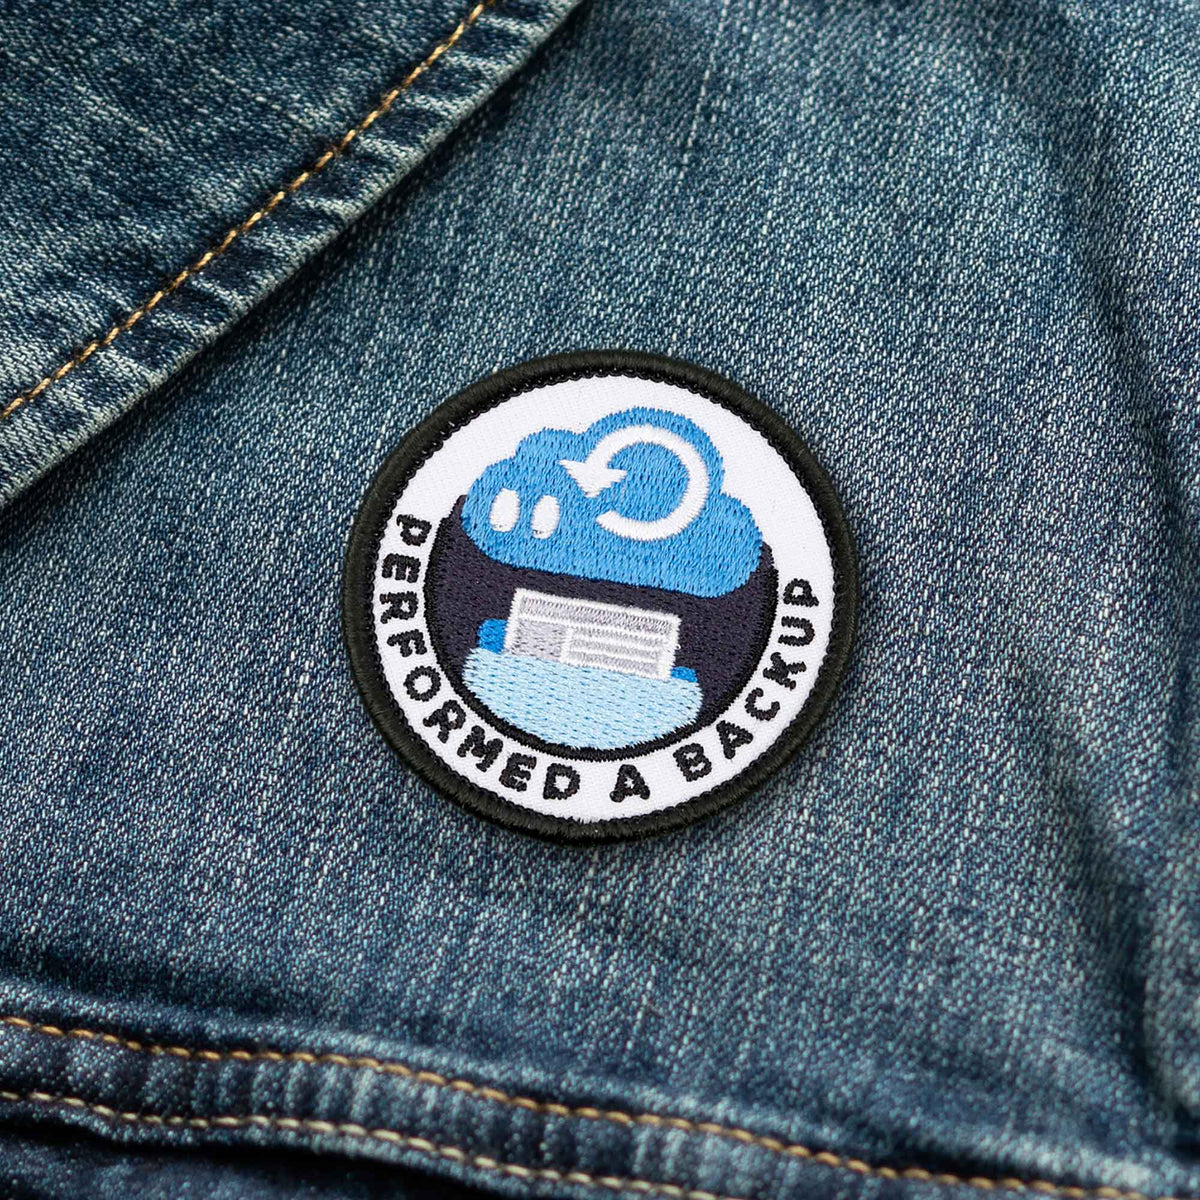 Performed A Backup adulting merit badge patch for adults on denim jacket